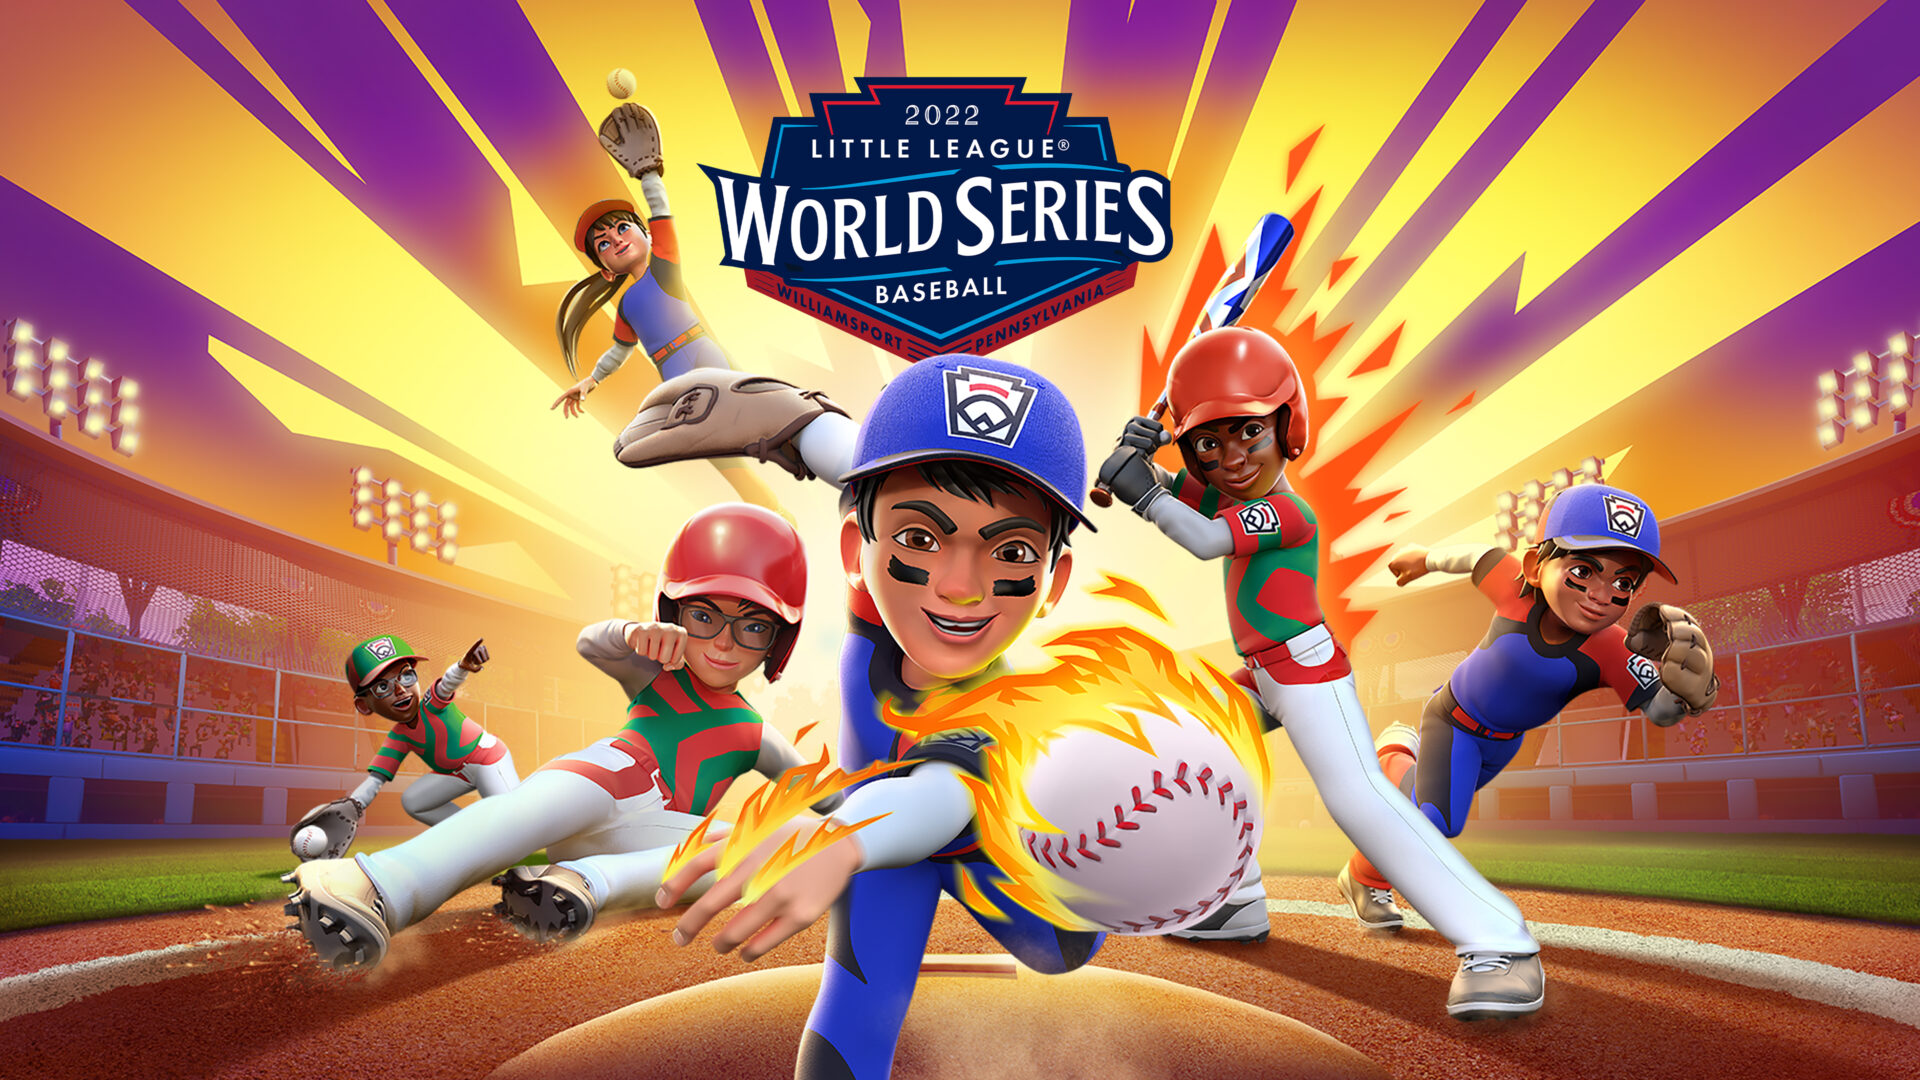 Little League World Series Baseball 2022 Announced Features Revealed